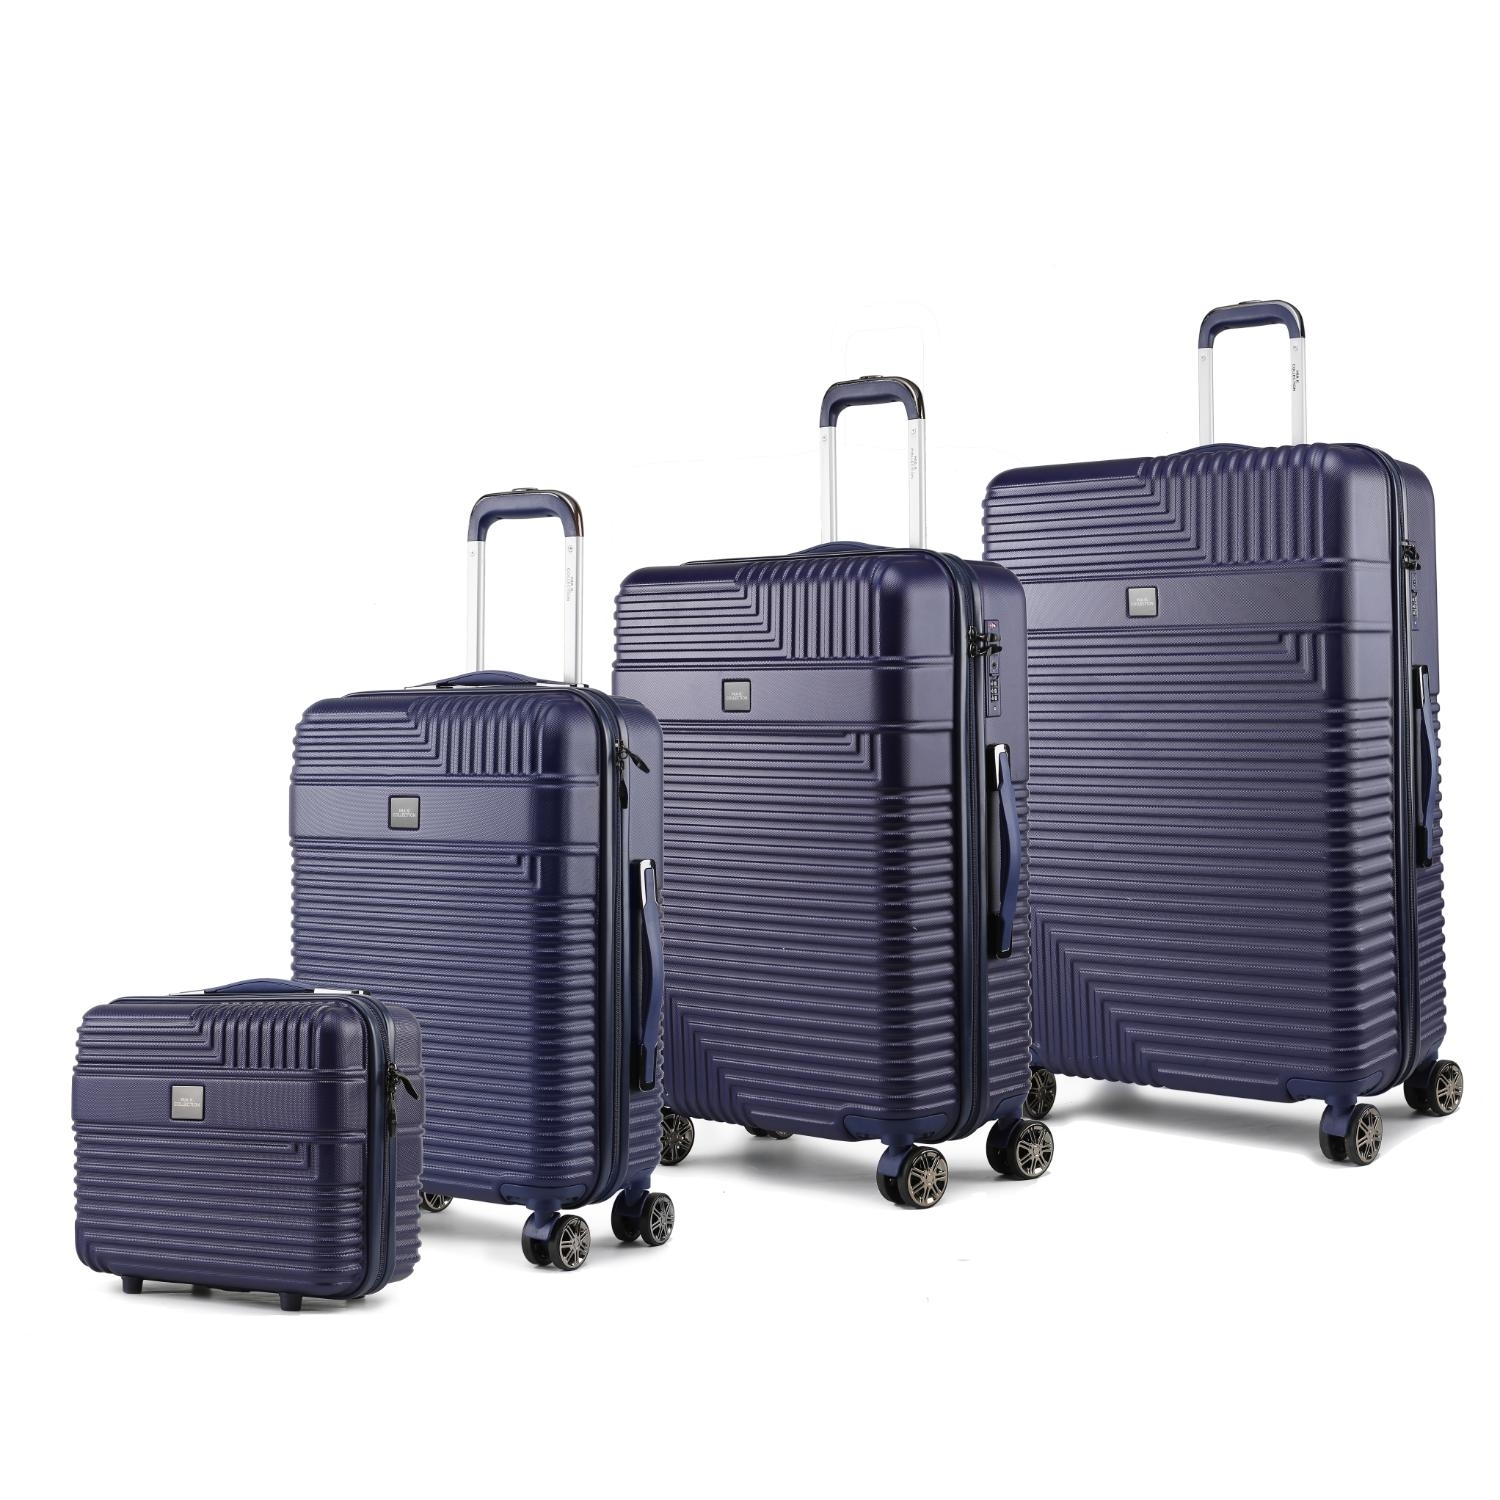 MKF Collection Mykonos Luggage Set- Extra Large Check-in, Large Check-in, Medium Carry-on, And Small Cosmetic Case 4 Pieces By Mia K - Navy